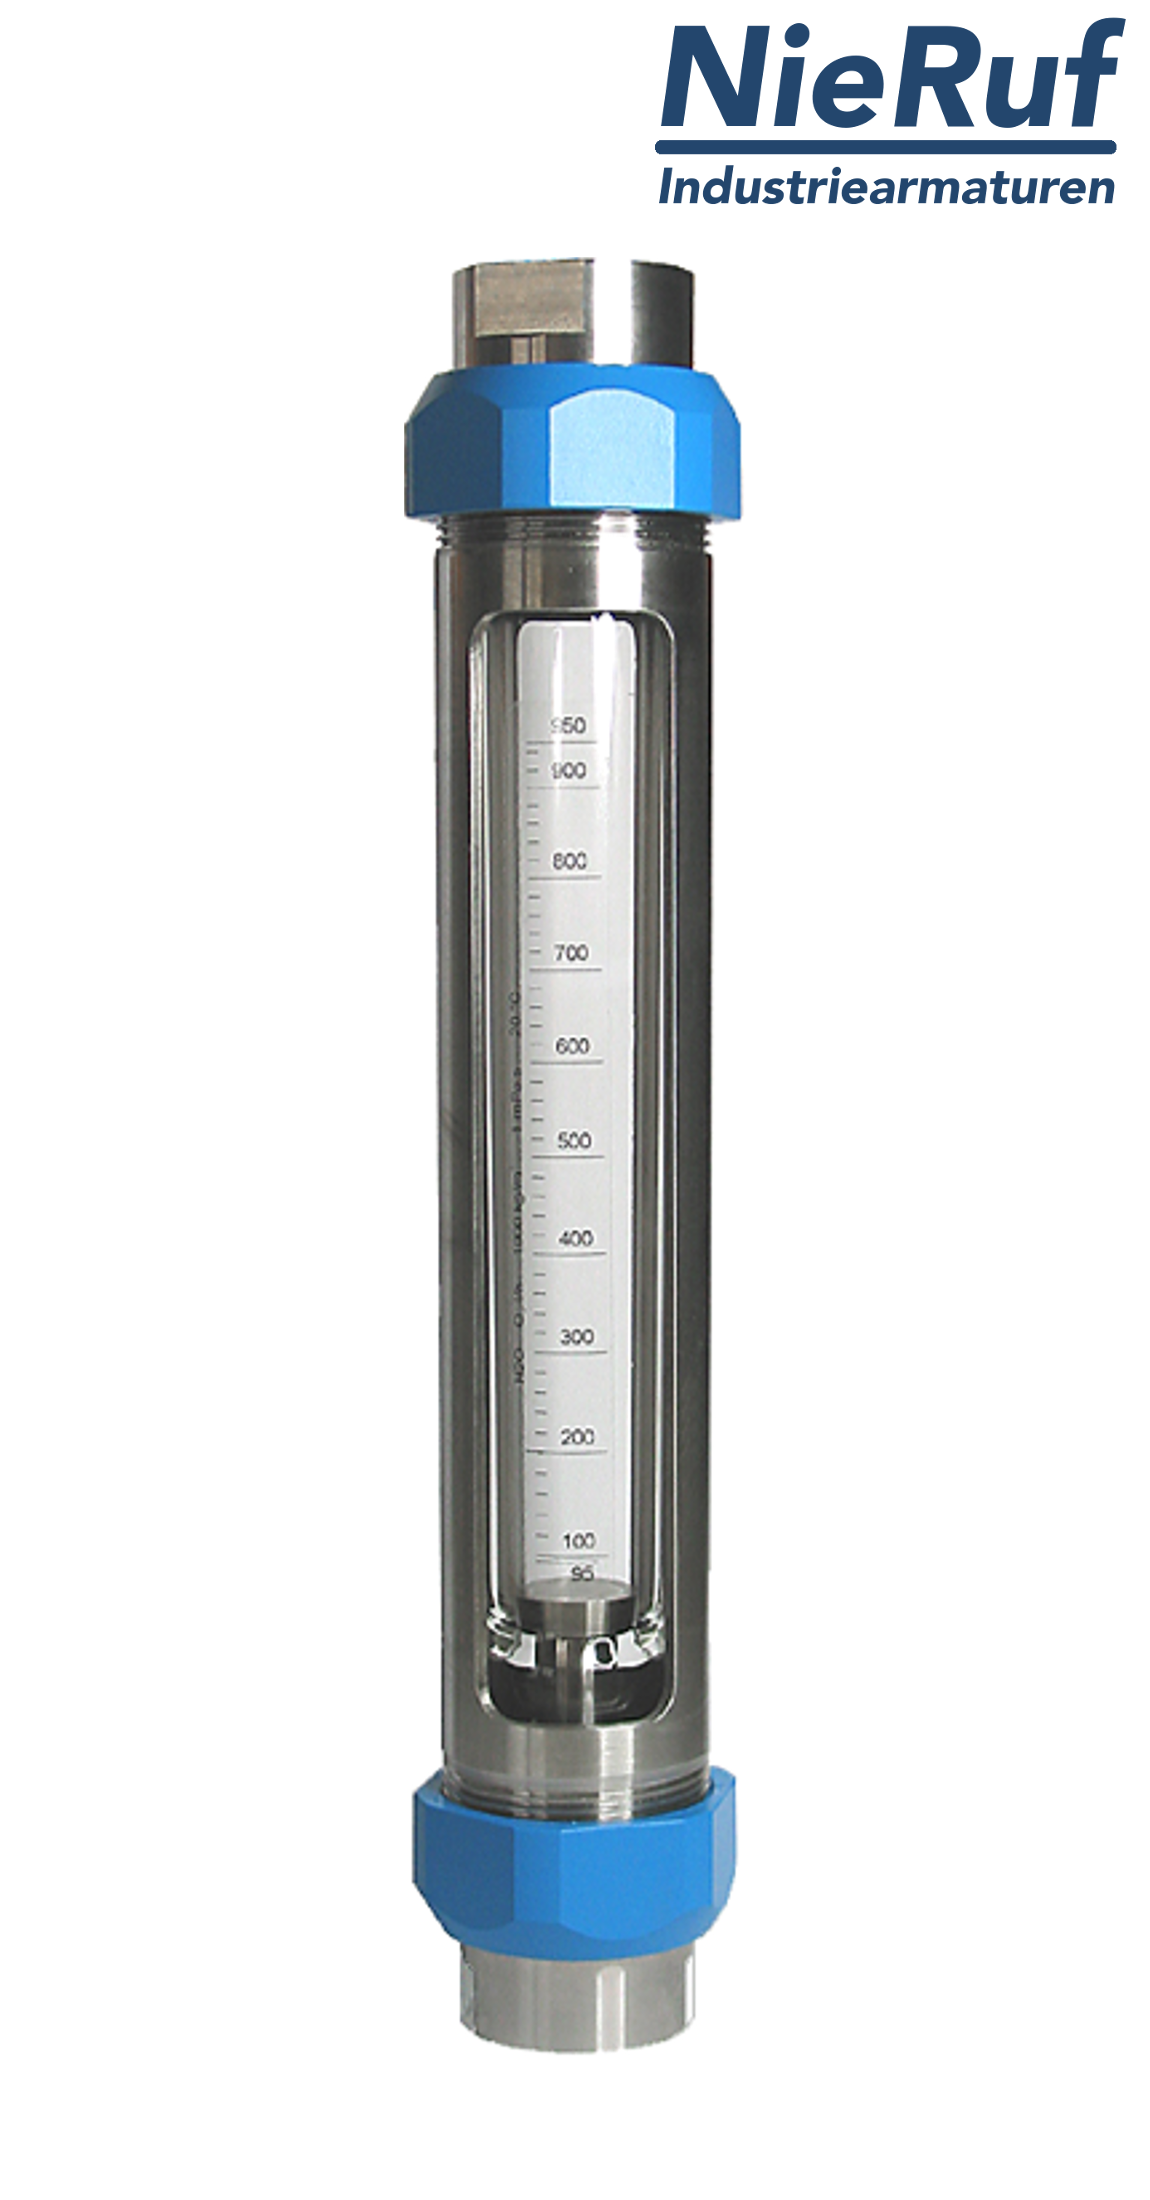 Variable area flowmeter stainless steel + borosilicate 1/2" inch 160.0 - 1600 l/h water EPDM